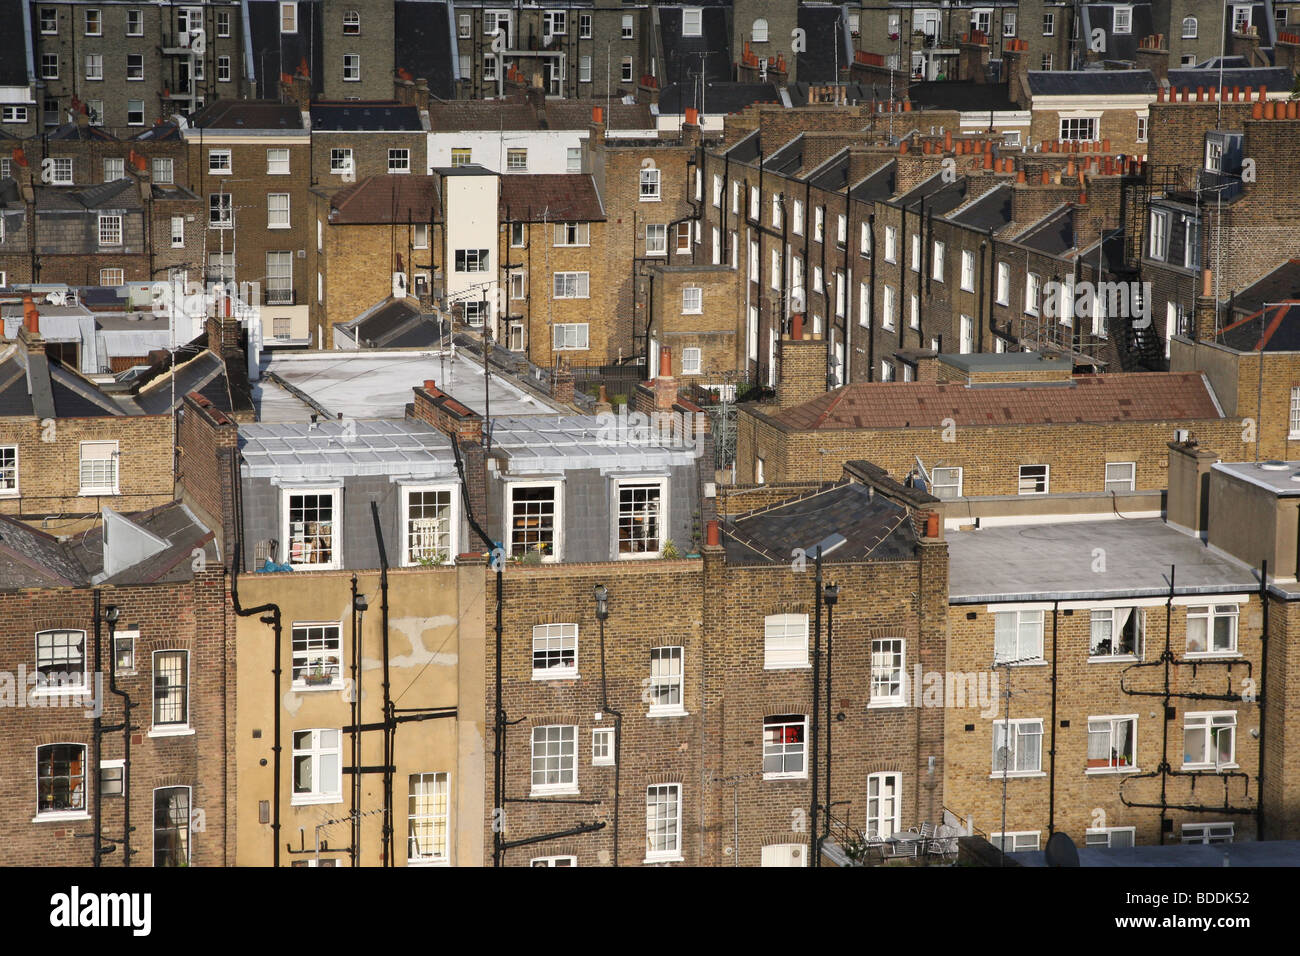 Aeriel view of housing in London east of Marylebone Station Stock Photo